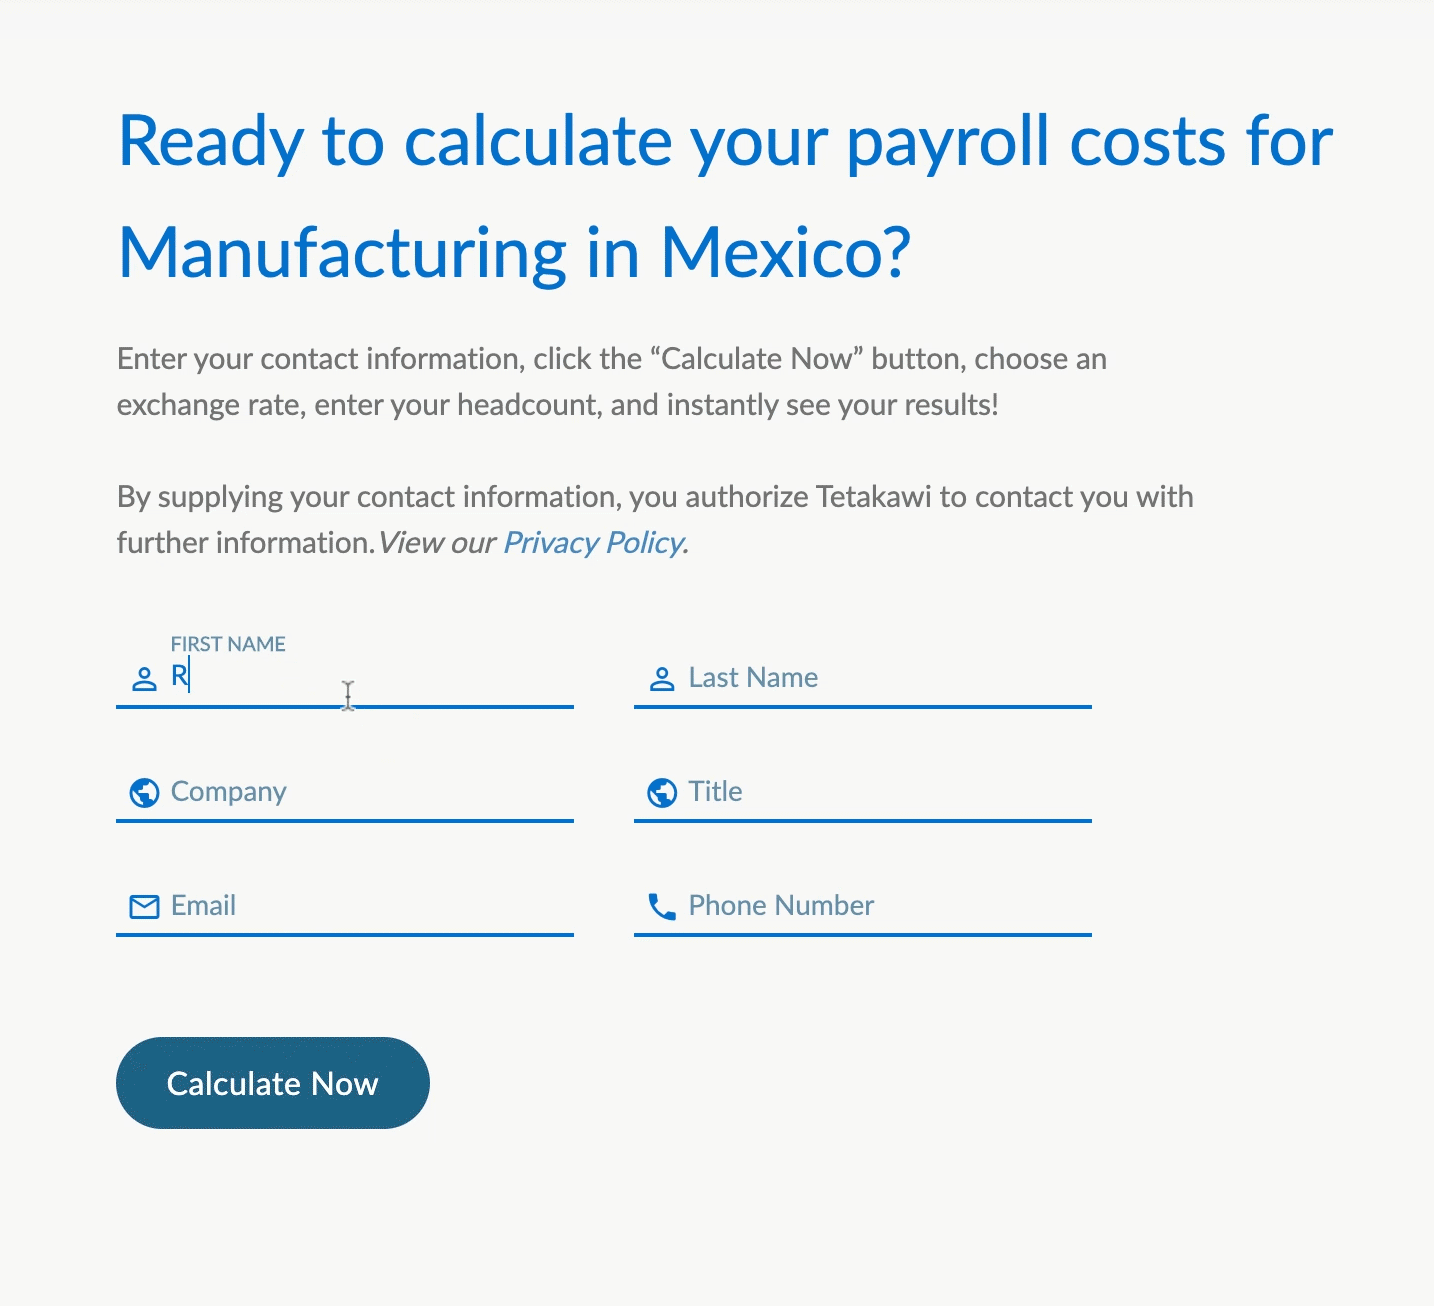 Tetakawi-_-Payroll-Cost-Calculator-For-Manufacturing-In-Mexico